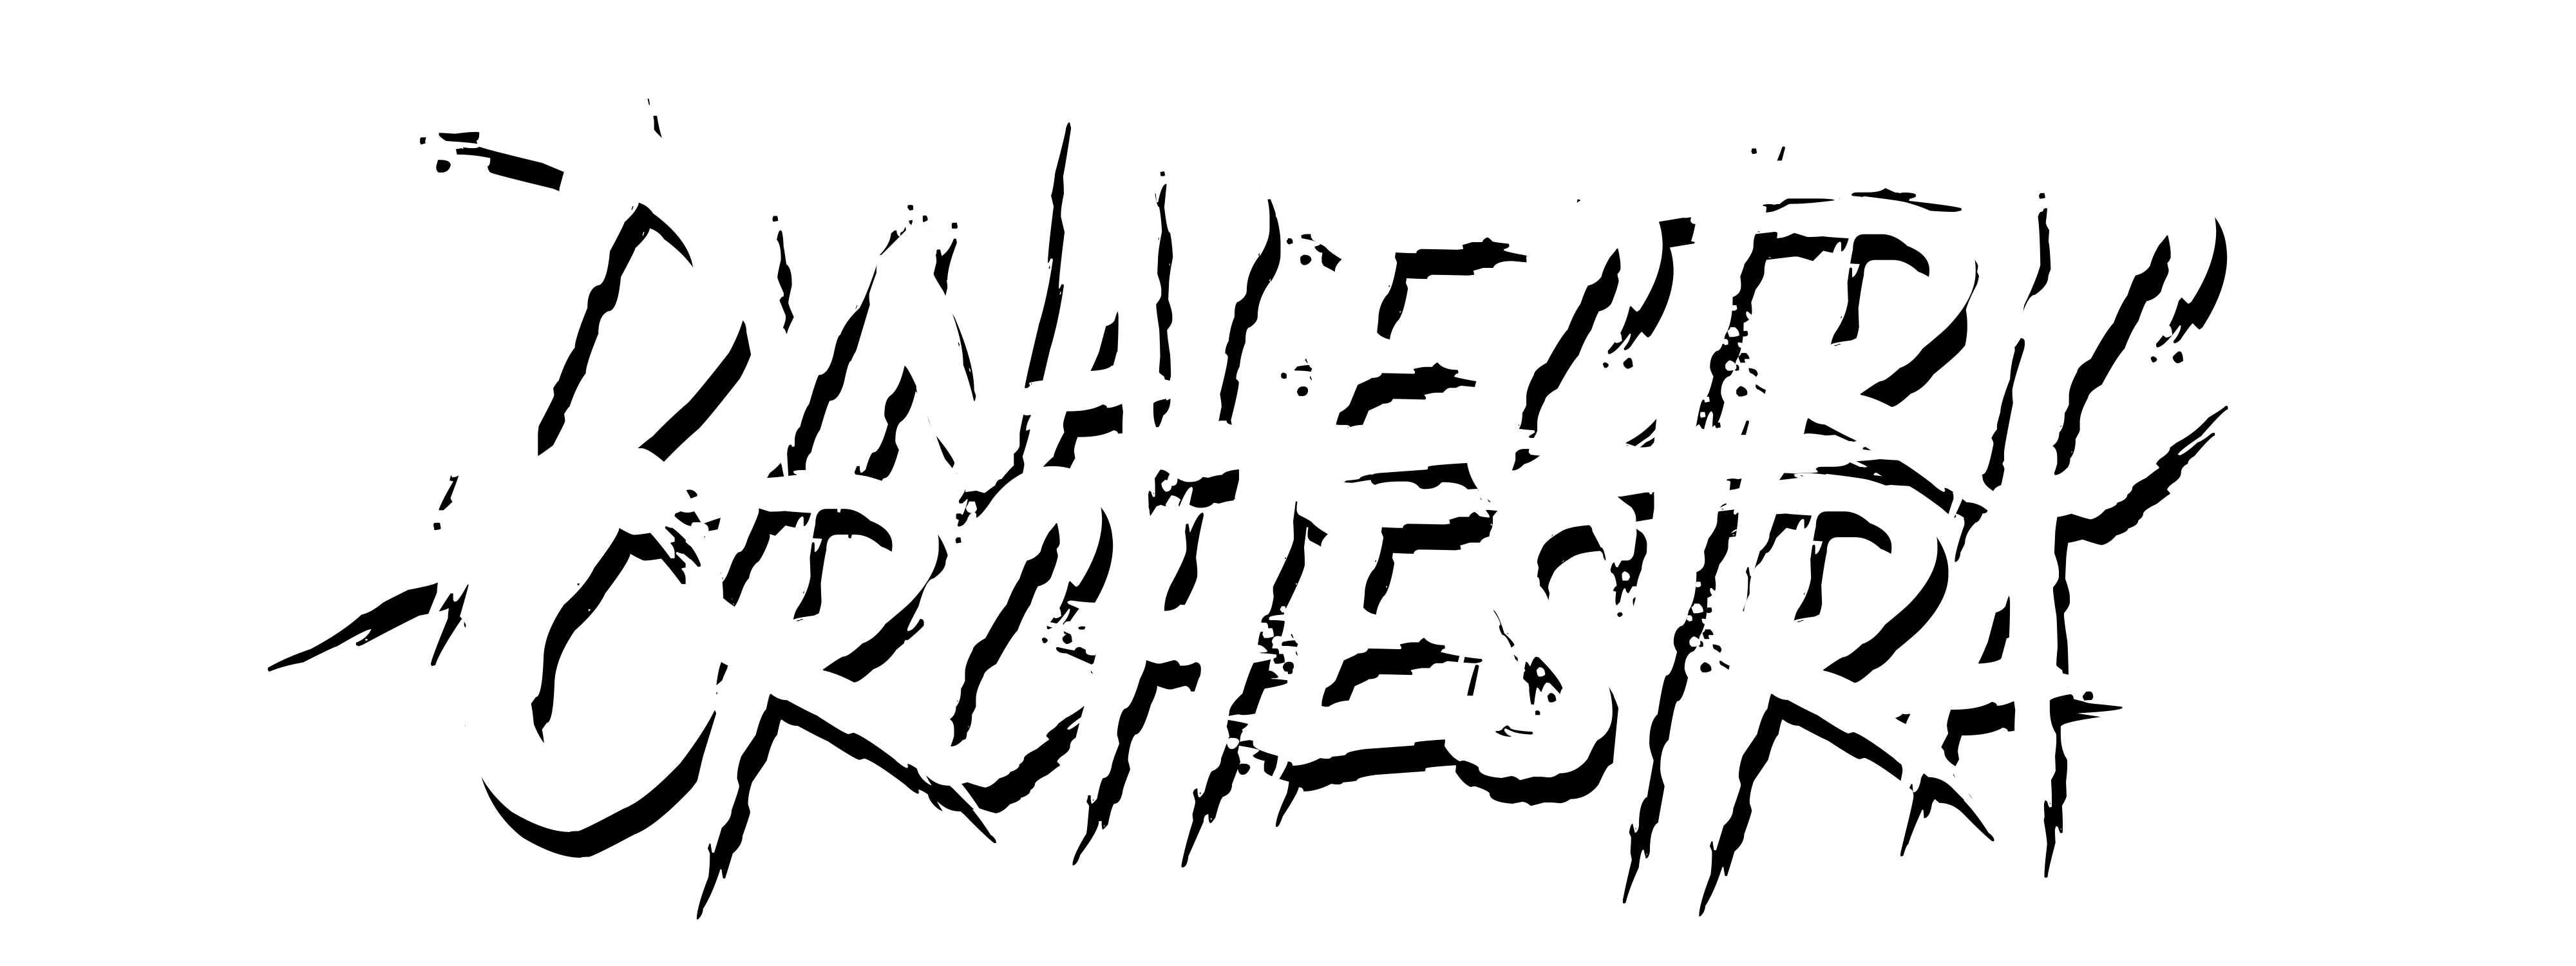 DYNALECTRIC ORCHESTRA